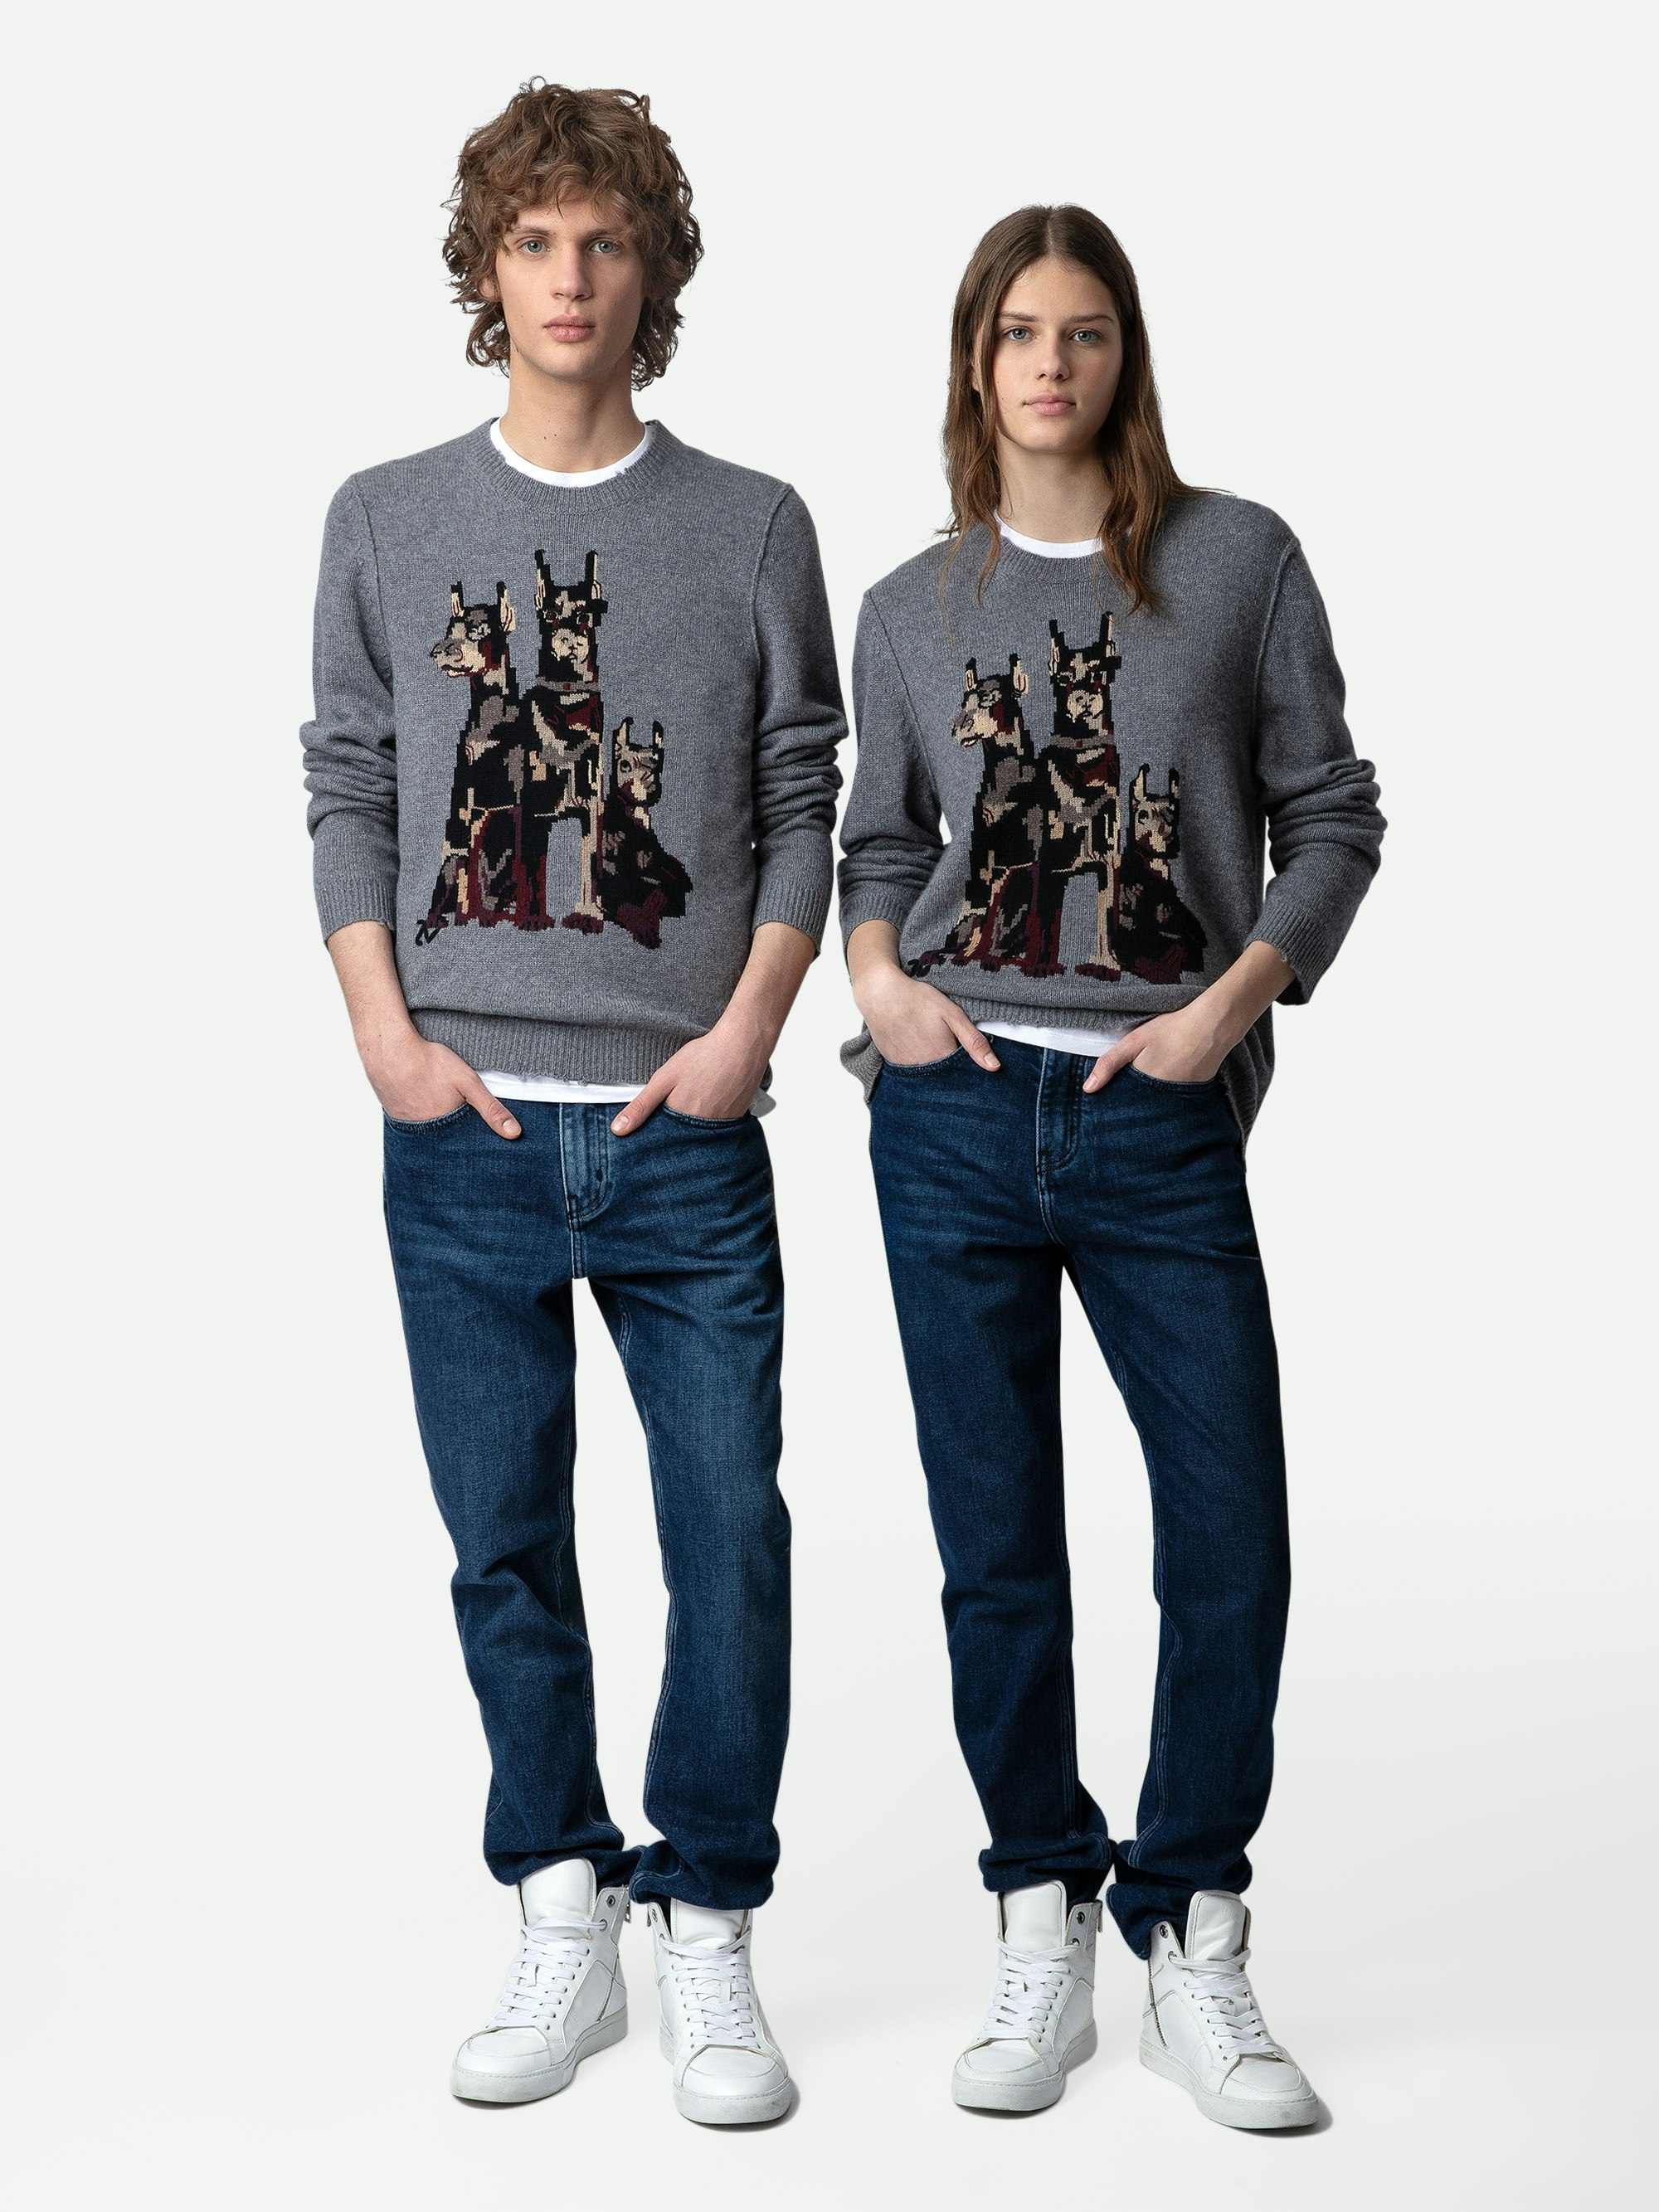 Kennedy Cashmere Sweater - Grey cashmere round-neck jumper with long sleeves and Doberman motif.